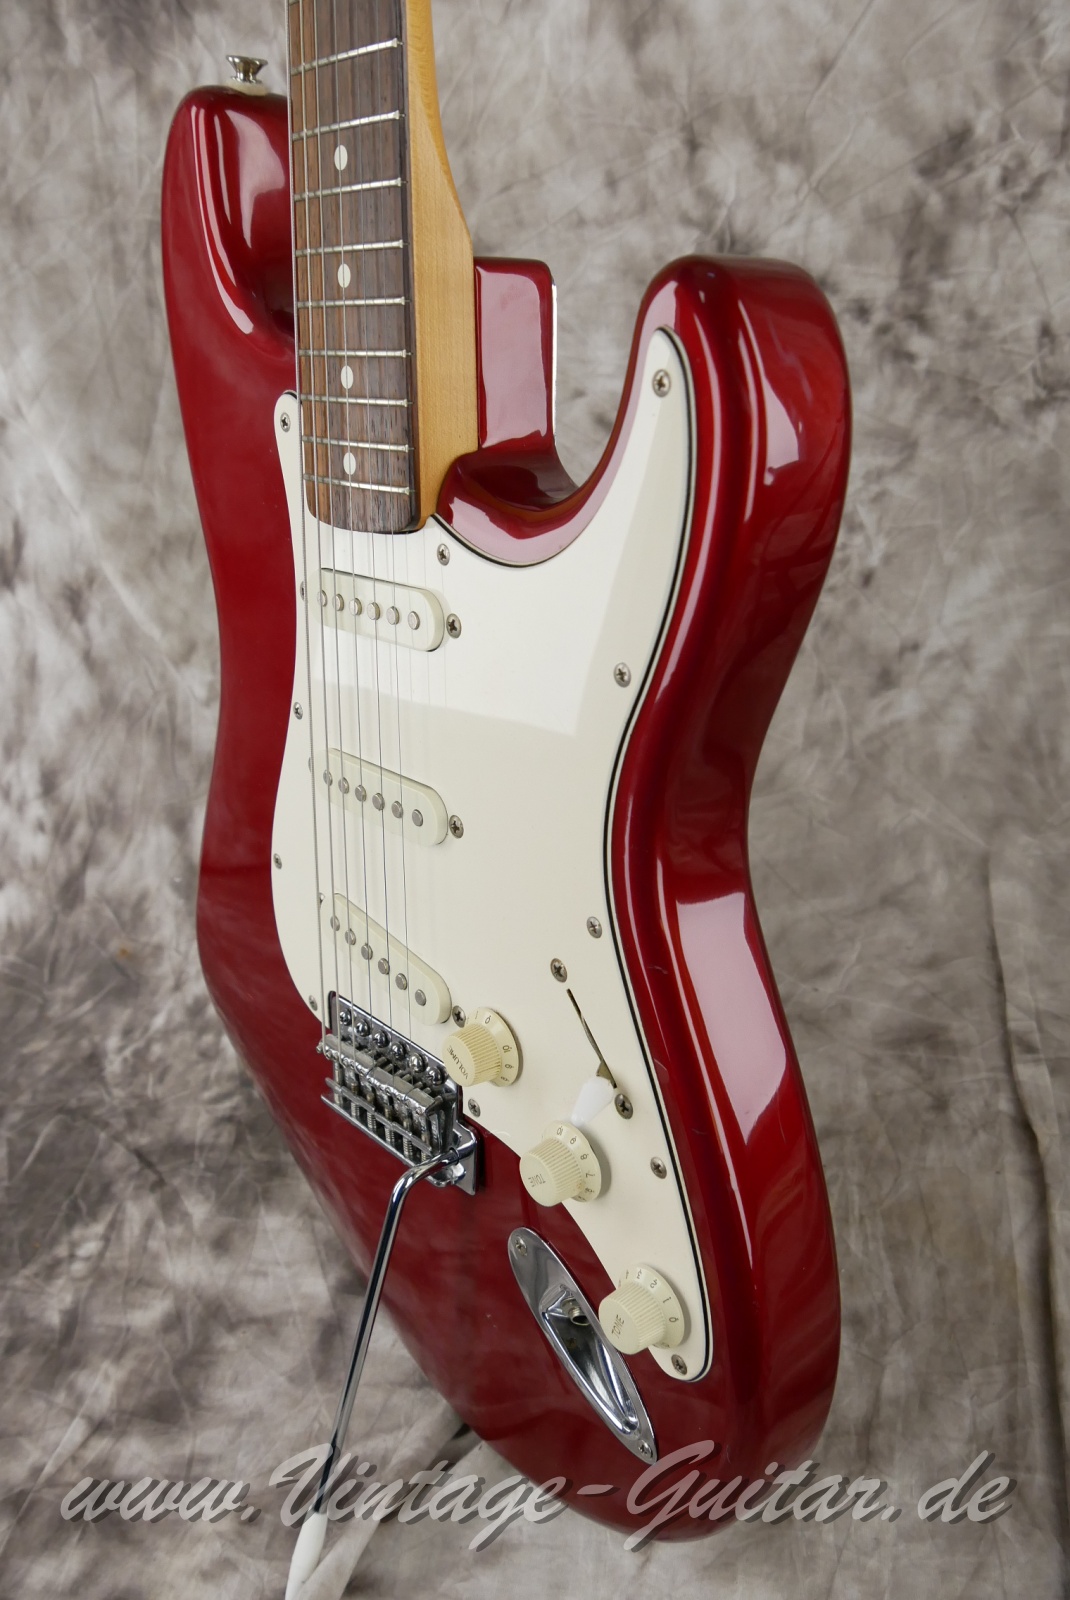 Fender_Stratocaster_Mexico_candy_apple_red_1991-010.JPG